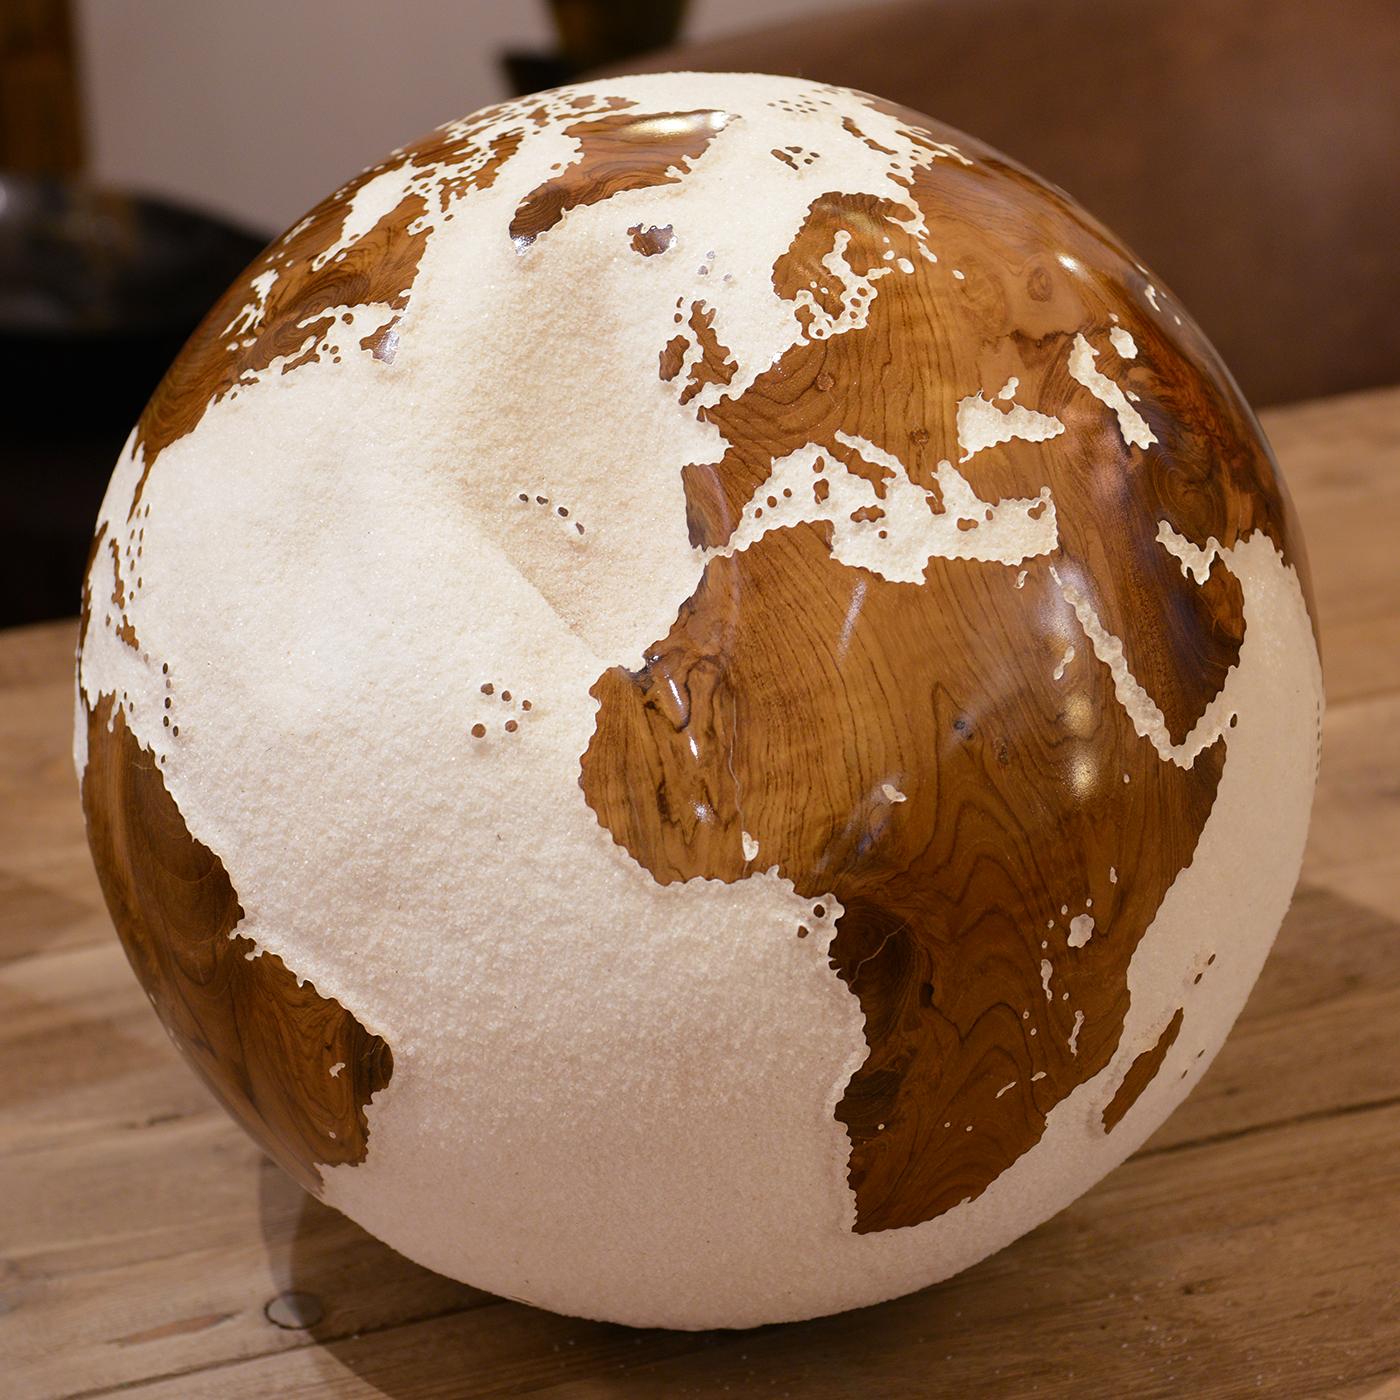 Sculpture Earth Globe white and teak all
in hand-carved natural teak root and white 
quartz powder. On swivel base with easy 
rotative system. Exceptional and unique piece.